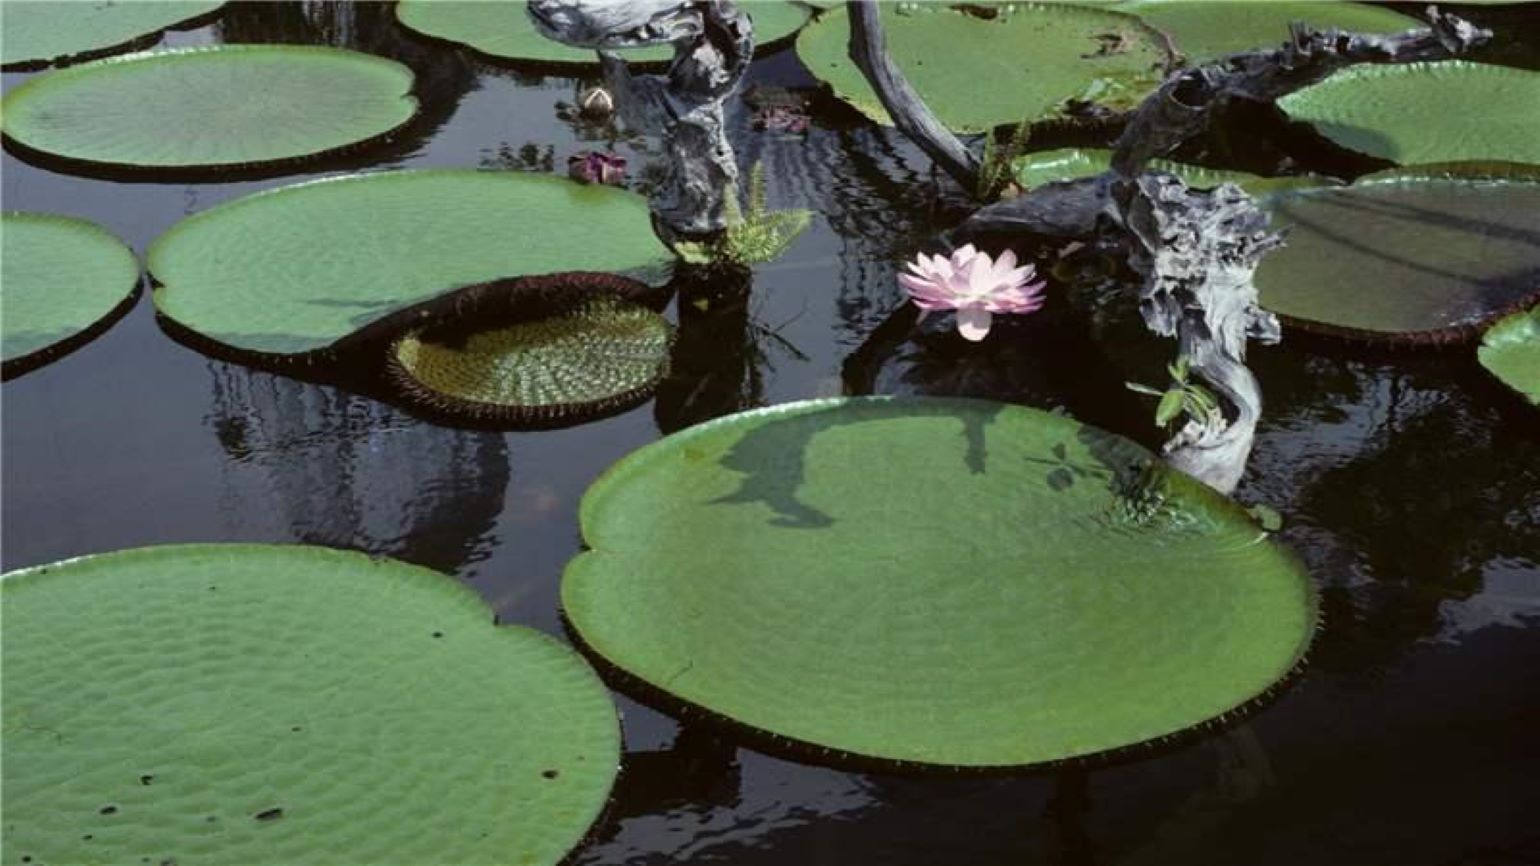 Large giant waterlily leaves on water and a pinkish flower